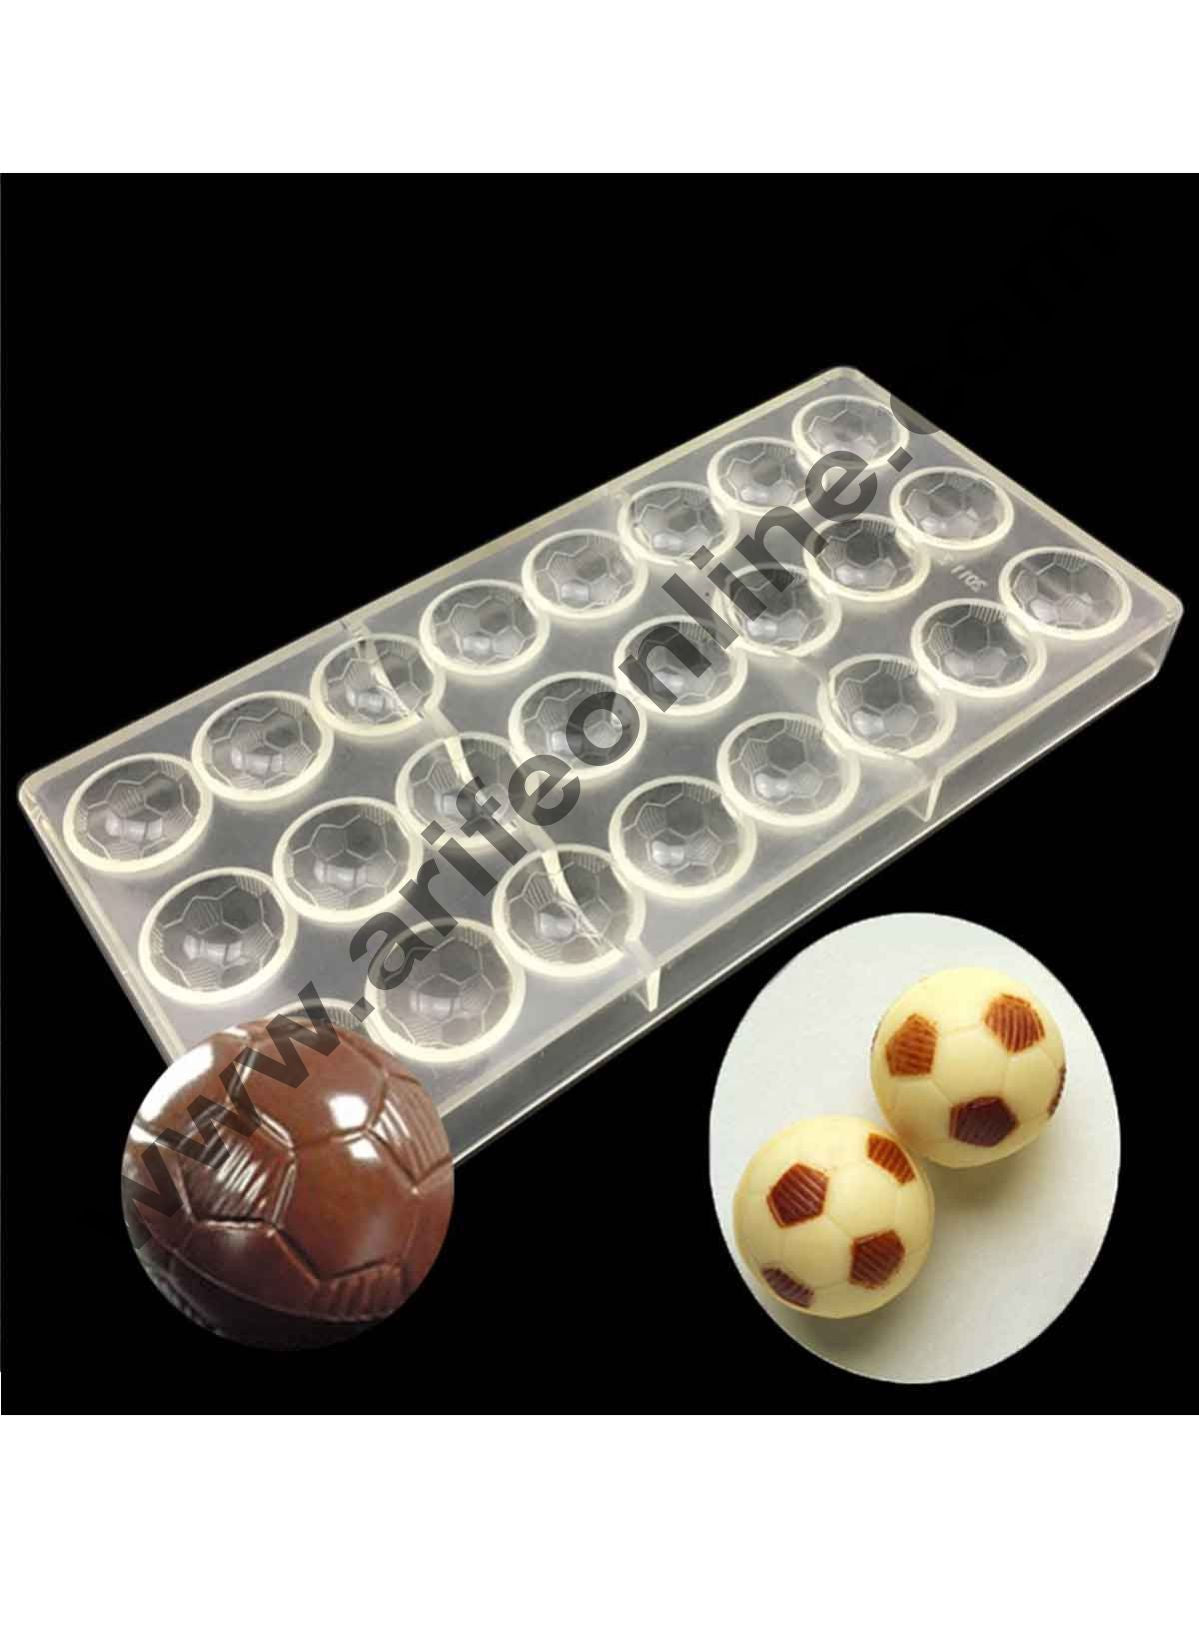 3 Pcs Mini Chocolate Bars Mould Non-Stick Chocolate Silicone Mold  Break-Apart Chocolate Mould with 12 Cavity Square Chocolate Moulds for  Making Energy Bar for Cake Decorating Dessert Decorating : Amazon.ae:  Kitchen